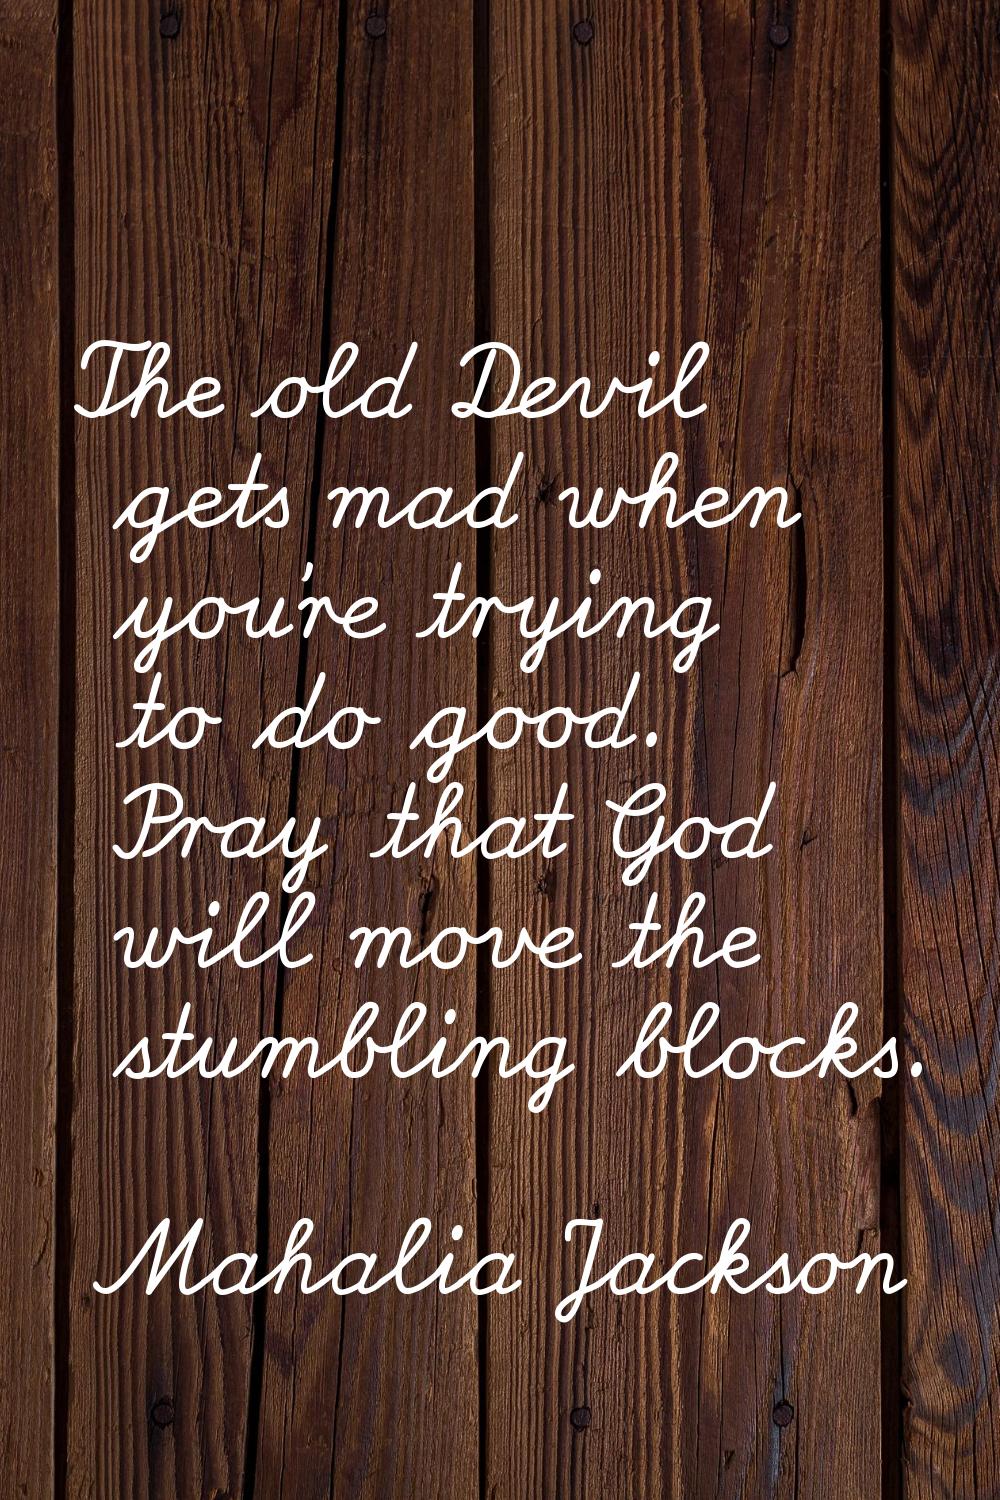 The old Devil gets mad when you're trying to do good. Pray that God will move the stumbling blocks.